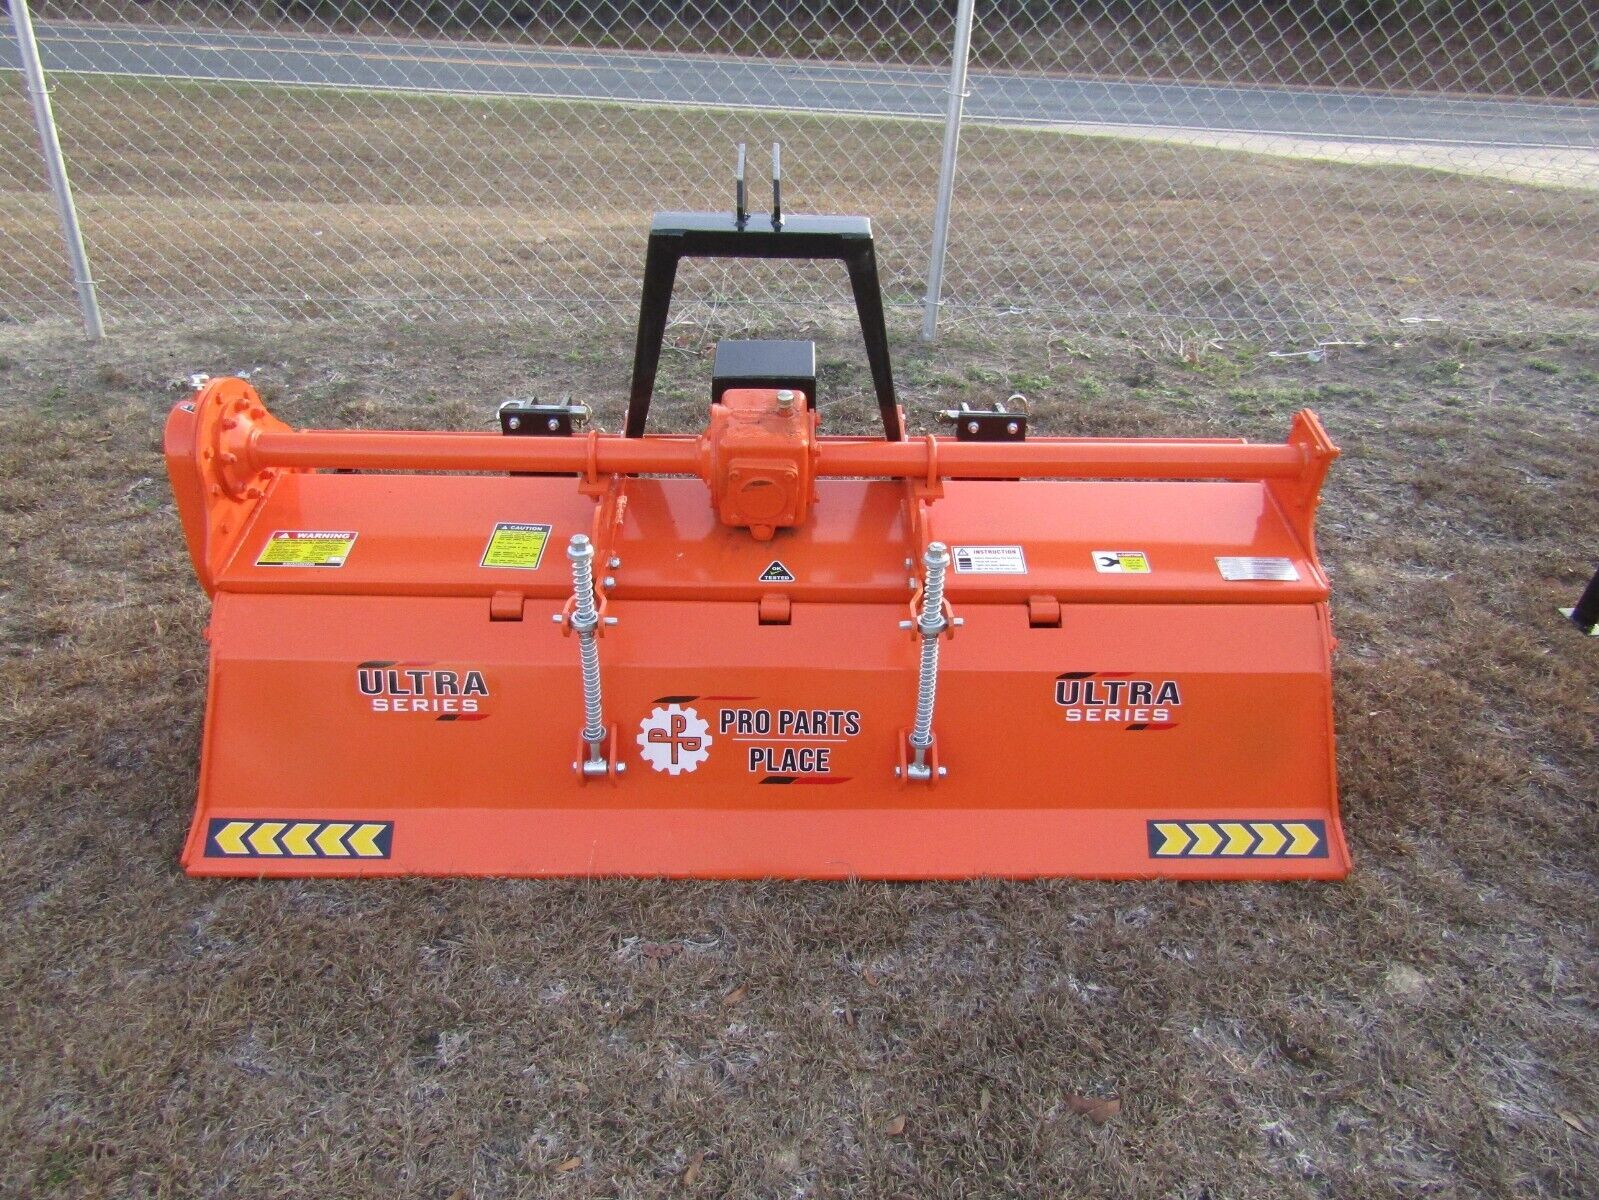 65" Rotary Tiller, HD Gear drive (no chain), slip clutch pto, all welded A-Frame